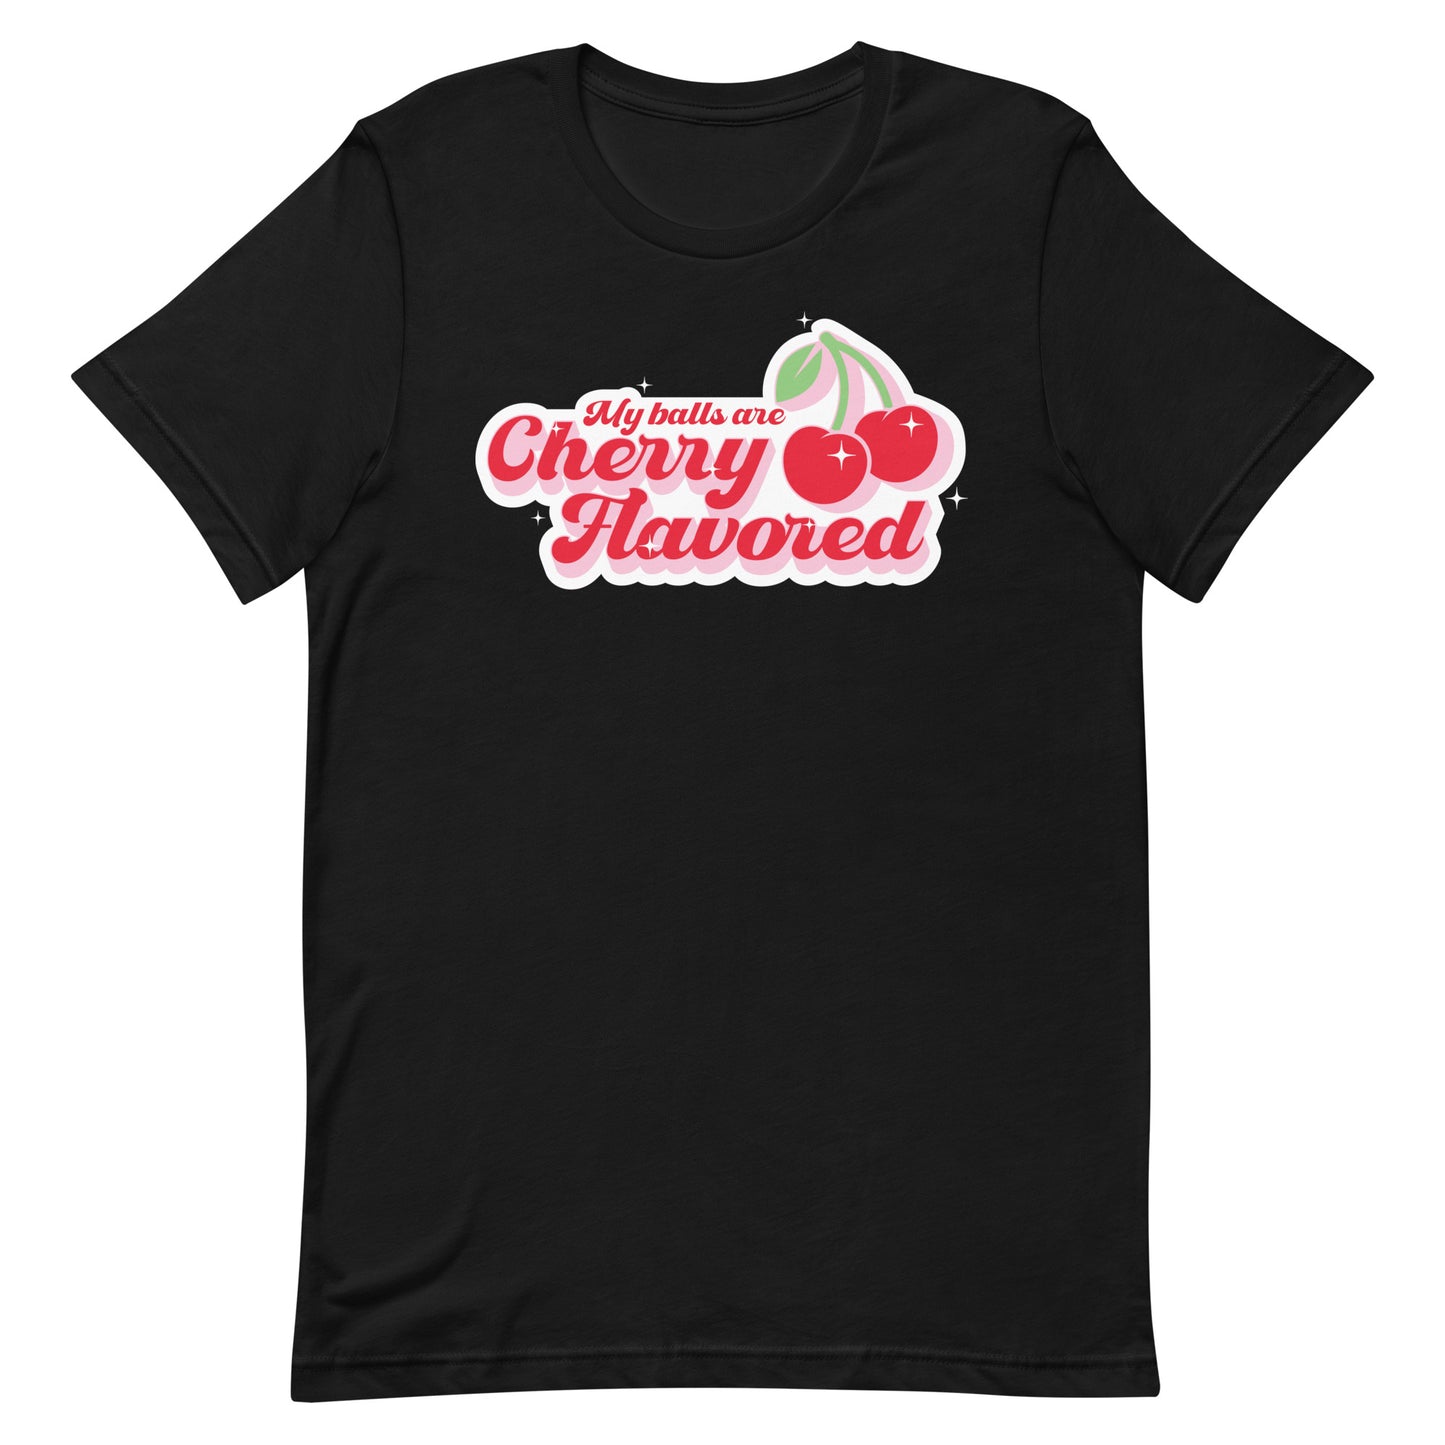 My Balls Are Cherry Flavored Unisex t-shirt